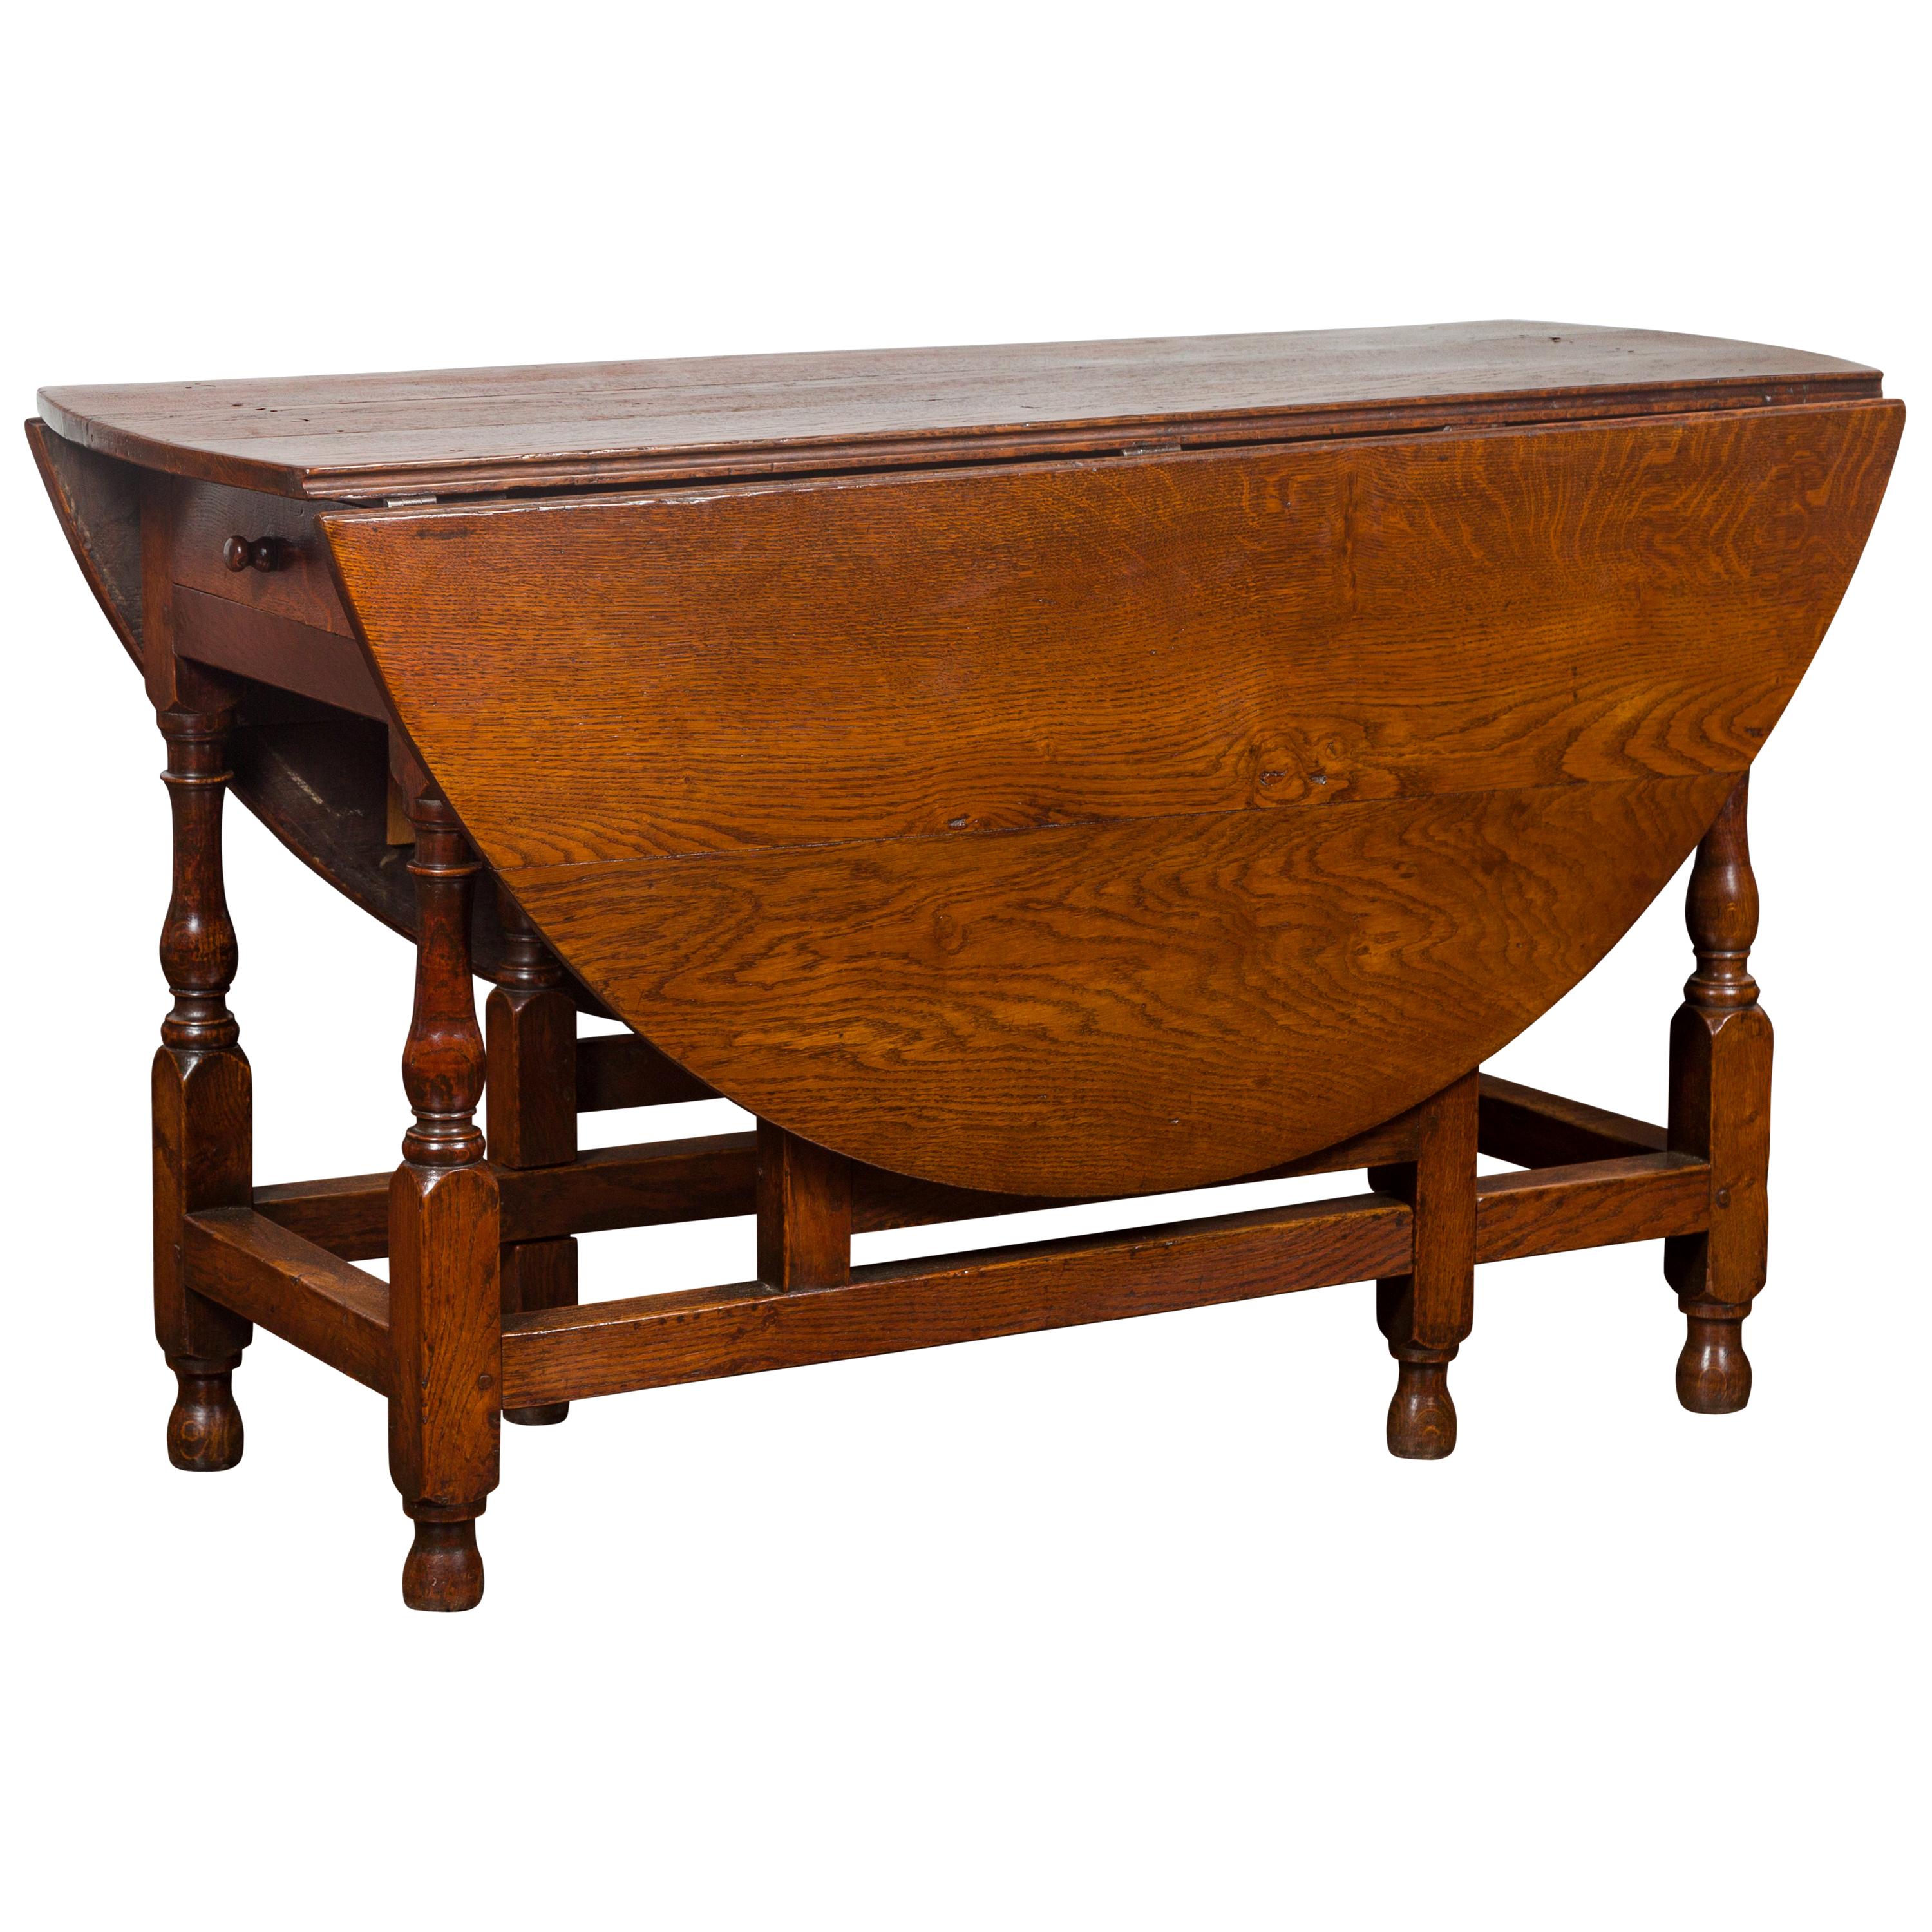 English Oval Oak Drop-Leaf Table with Single Drawer and Baluster Legs